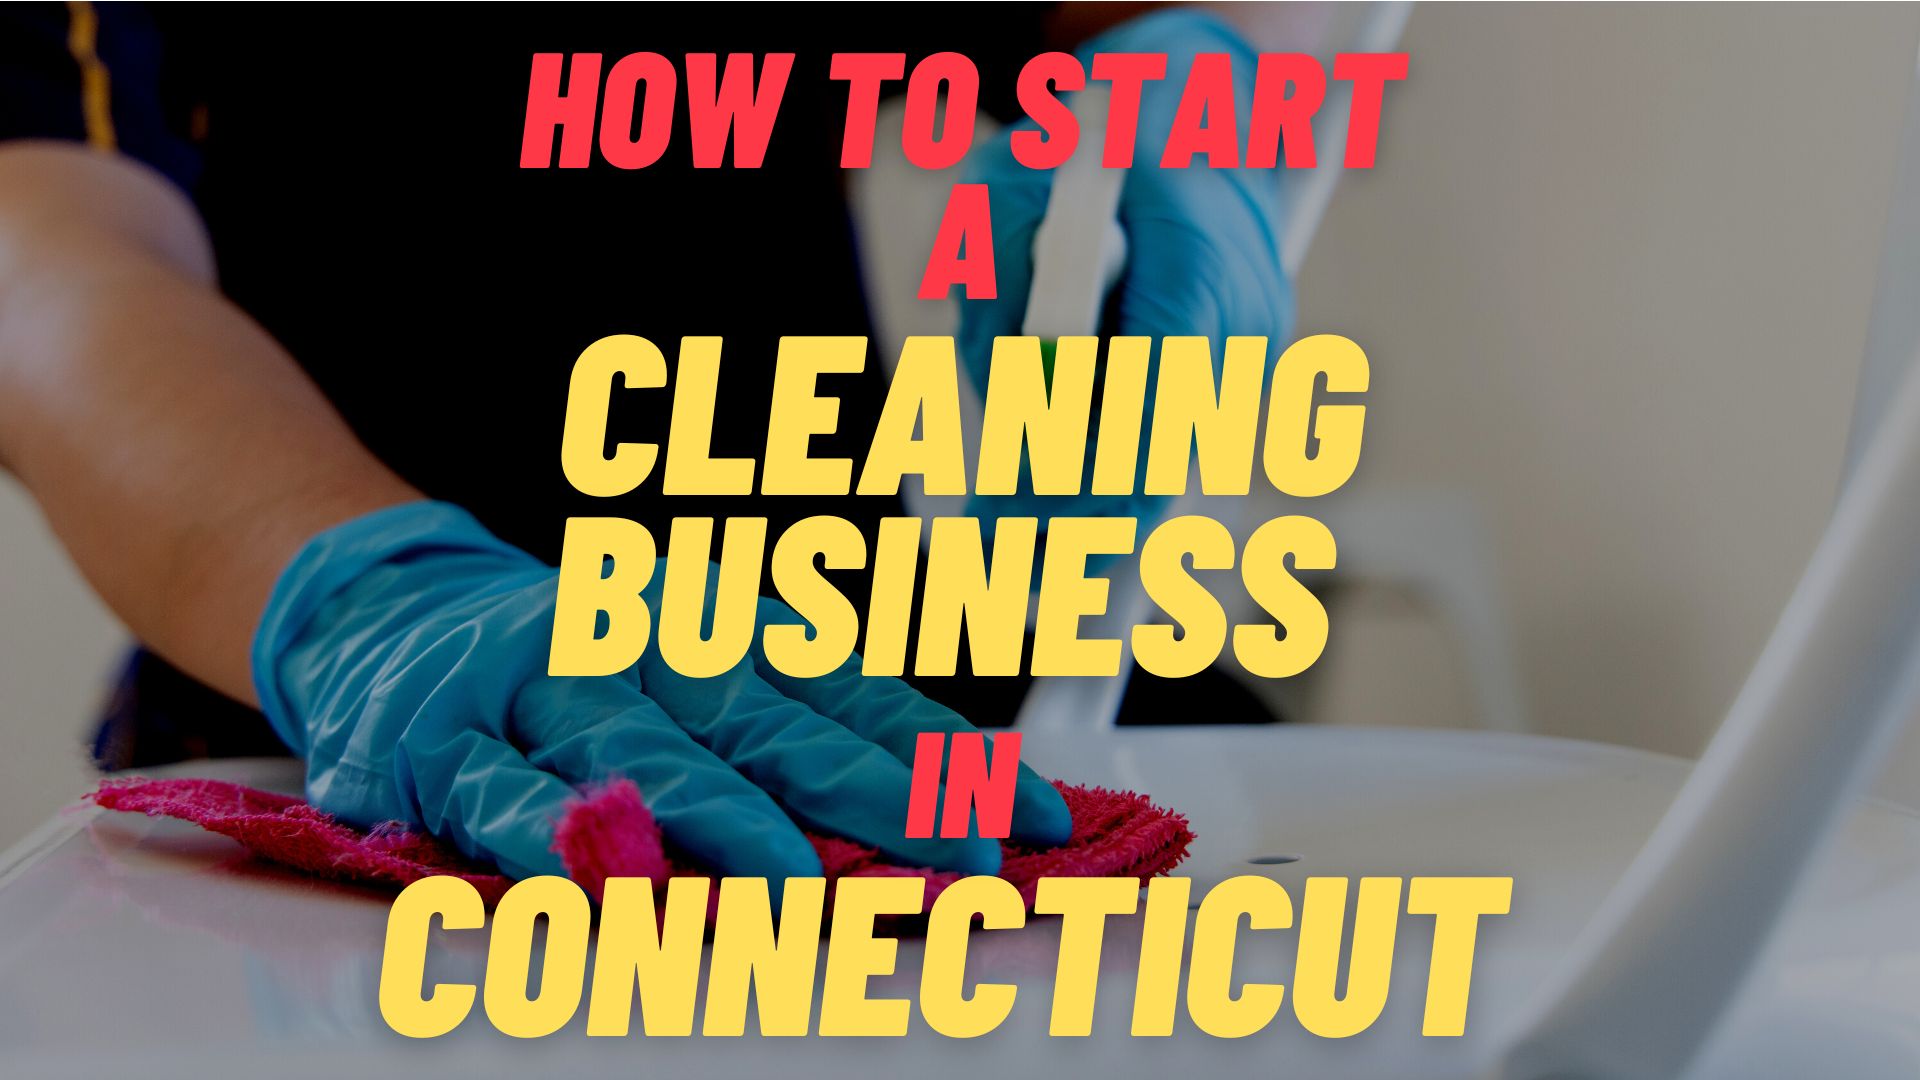 start a cleaning business in Connecticut